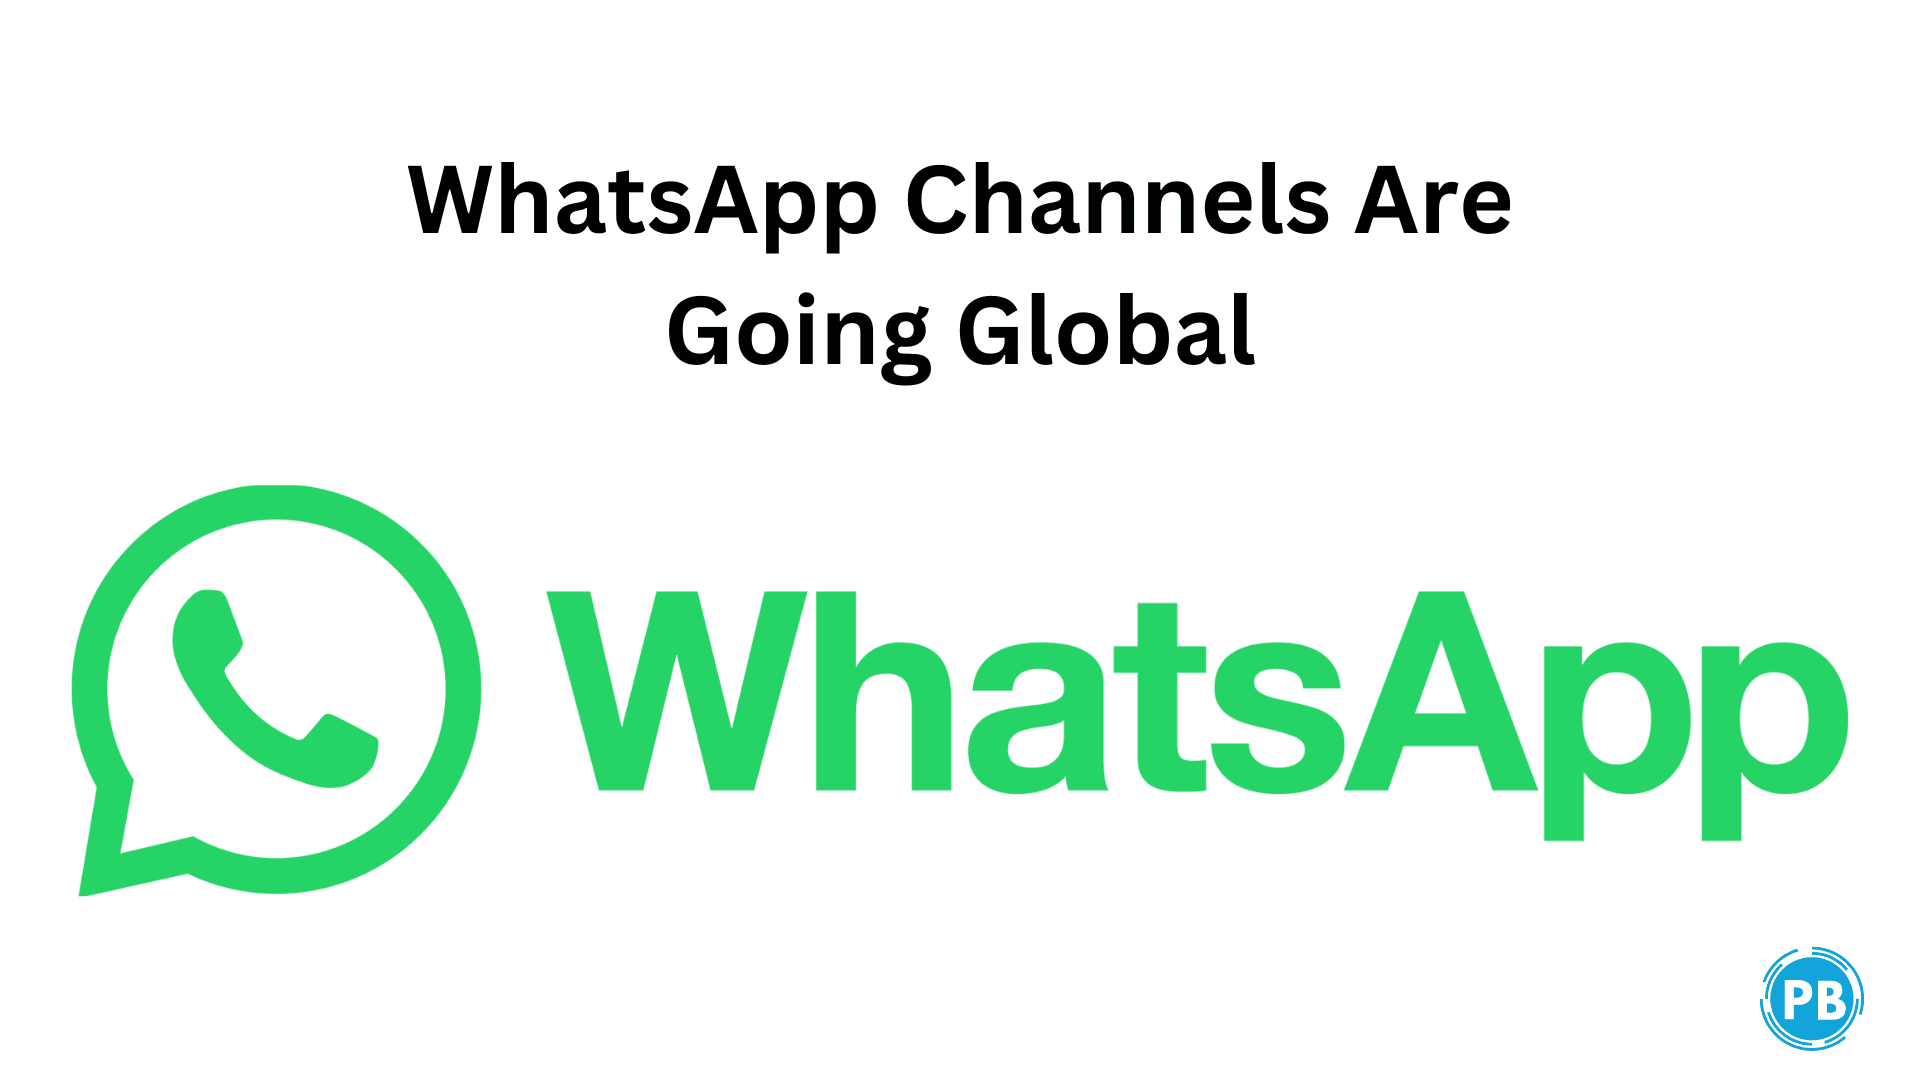 WhatsApp Channels Are Going Global details